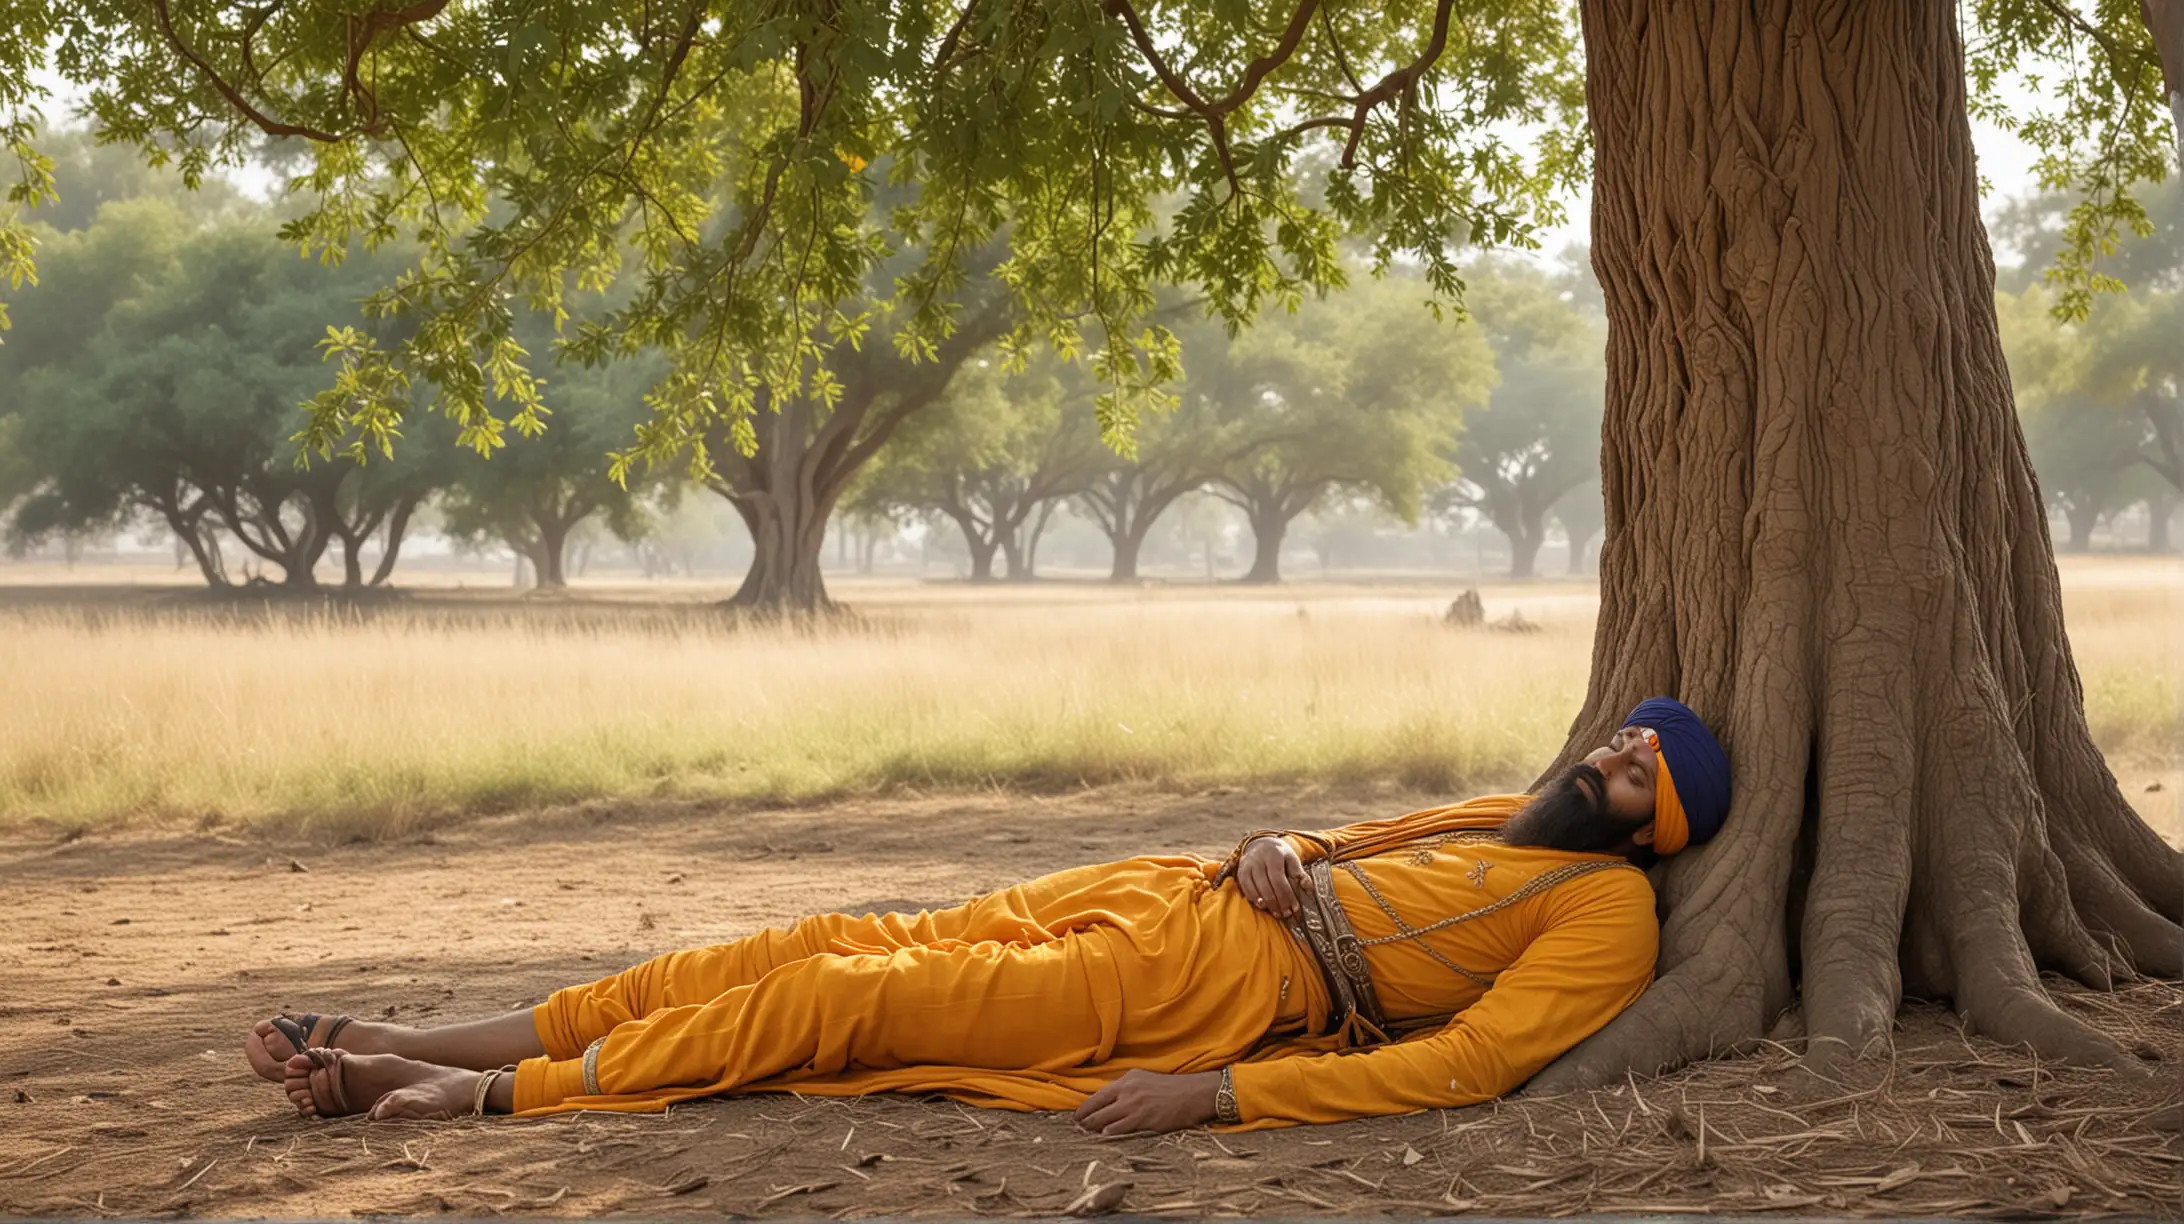 Sikh Warrior Resting Peacefully Under a Majestic Tree